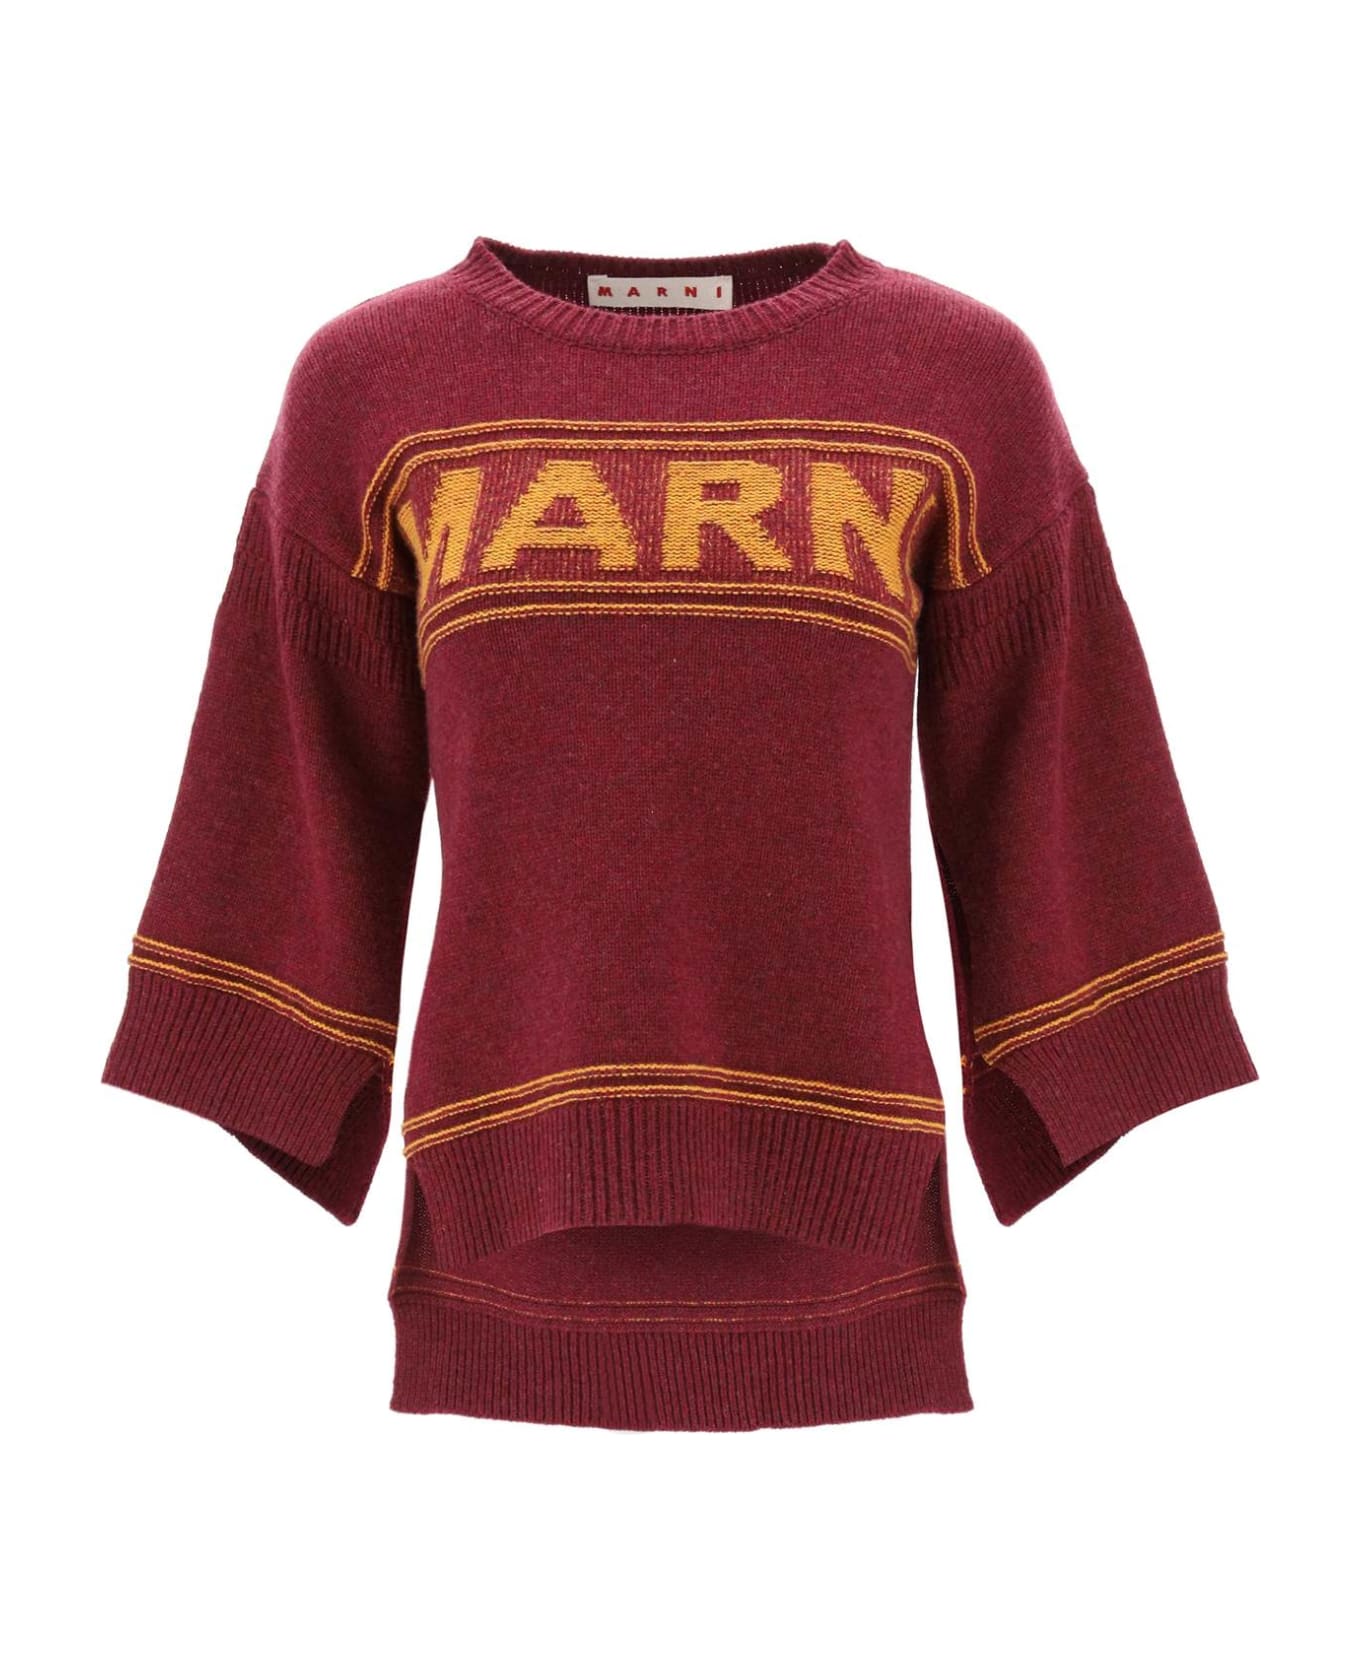 Marni Sweater In Jacquard Knit With Logo - RUBY (Red)